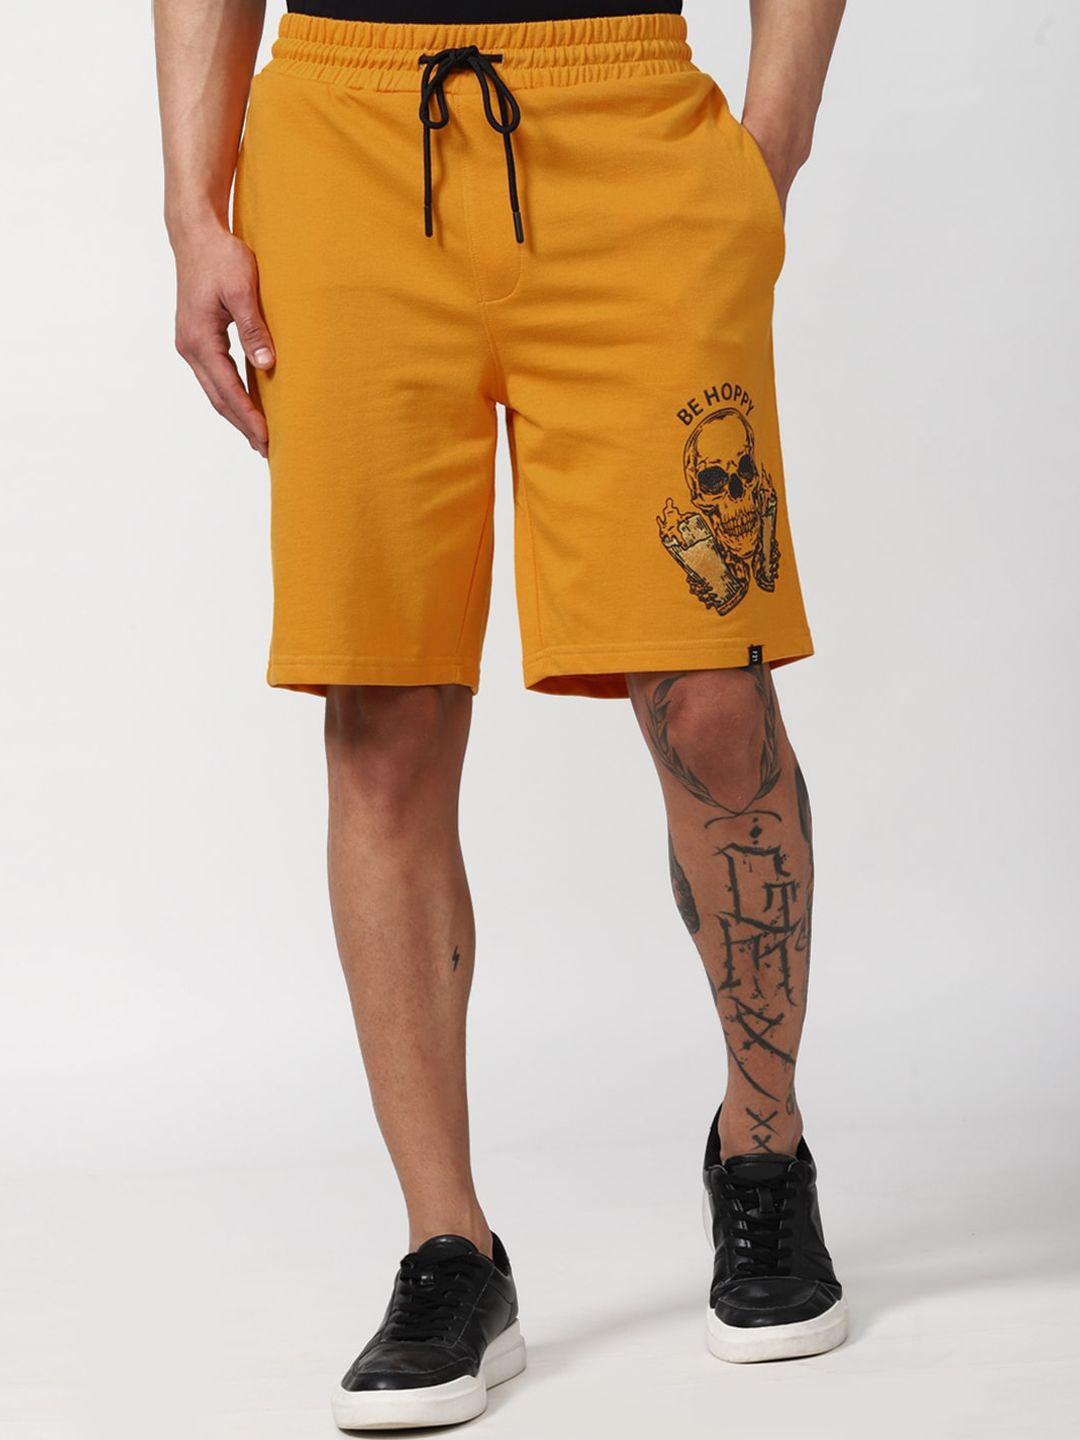 forever-21-men-yellow-graphic-printed-knee-length-shorts